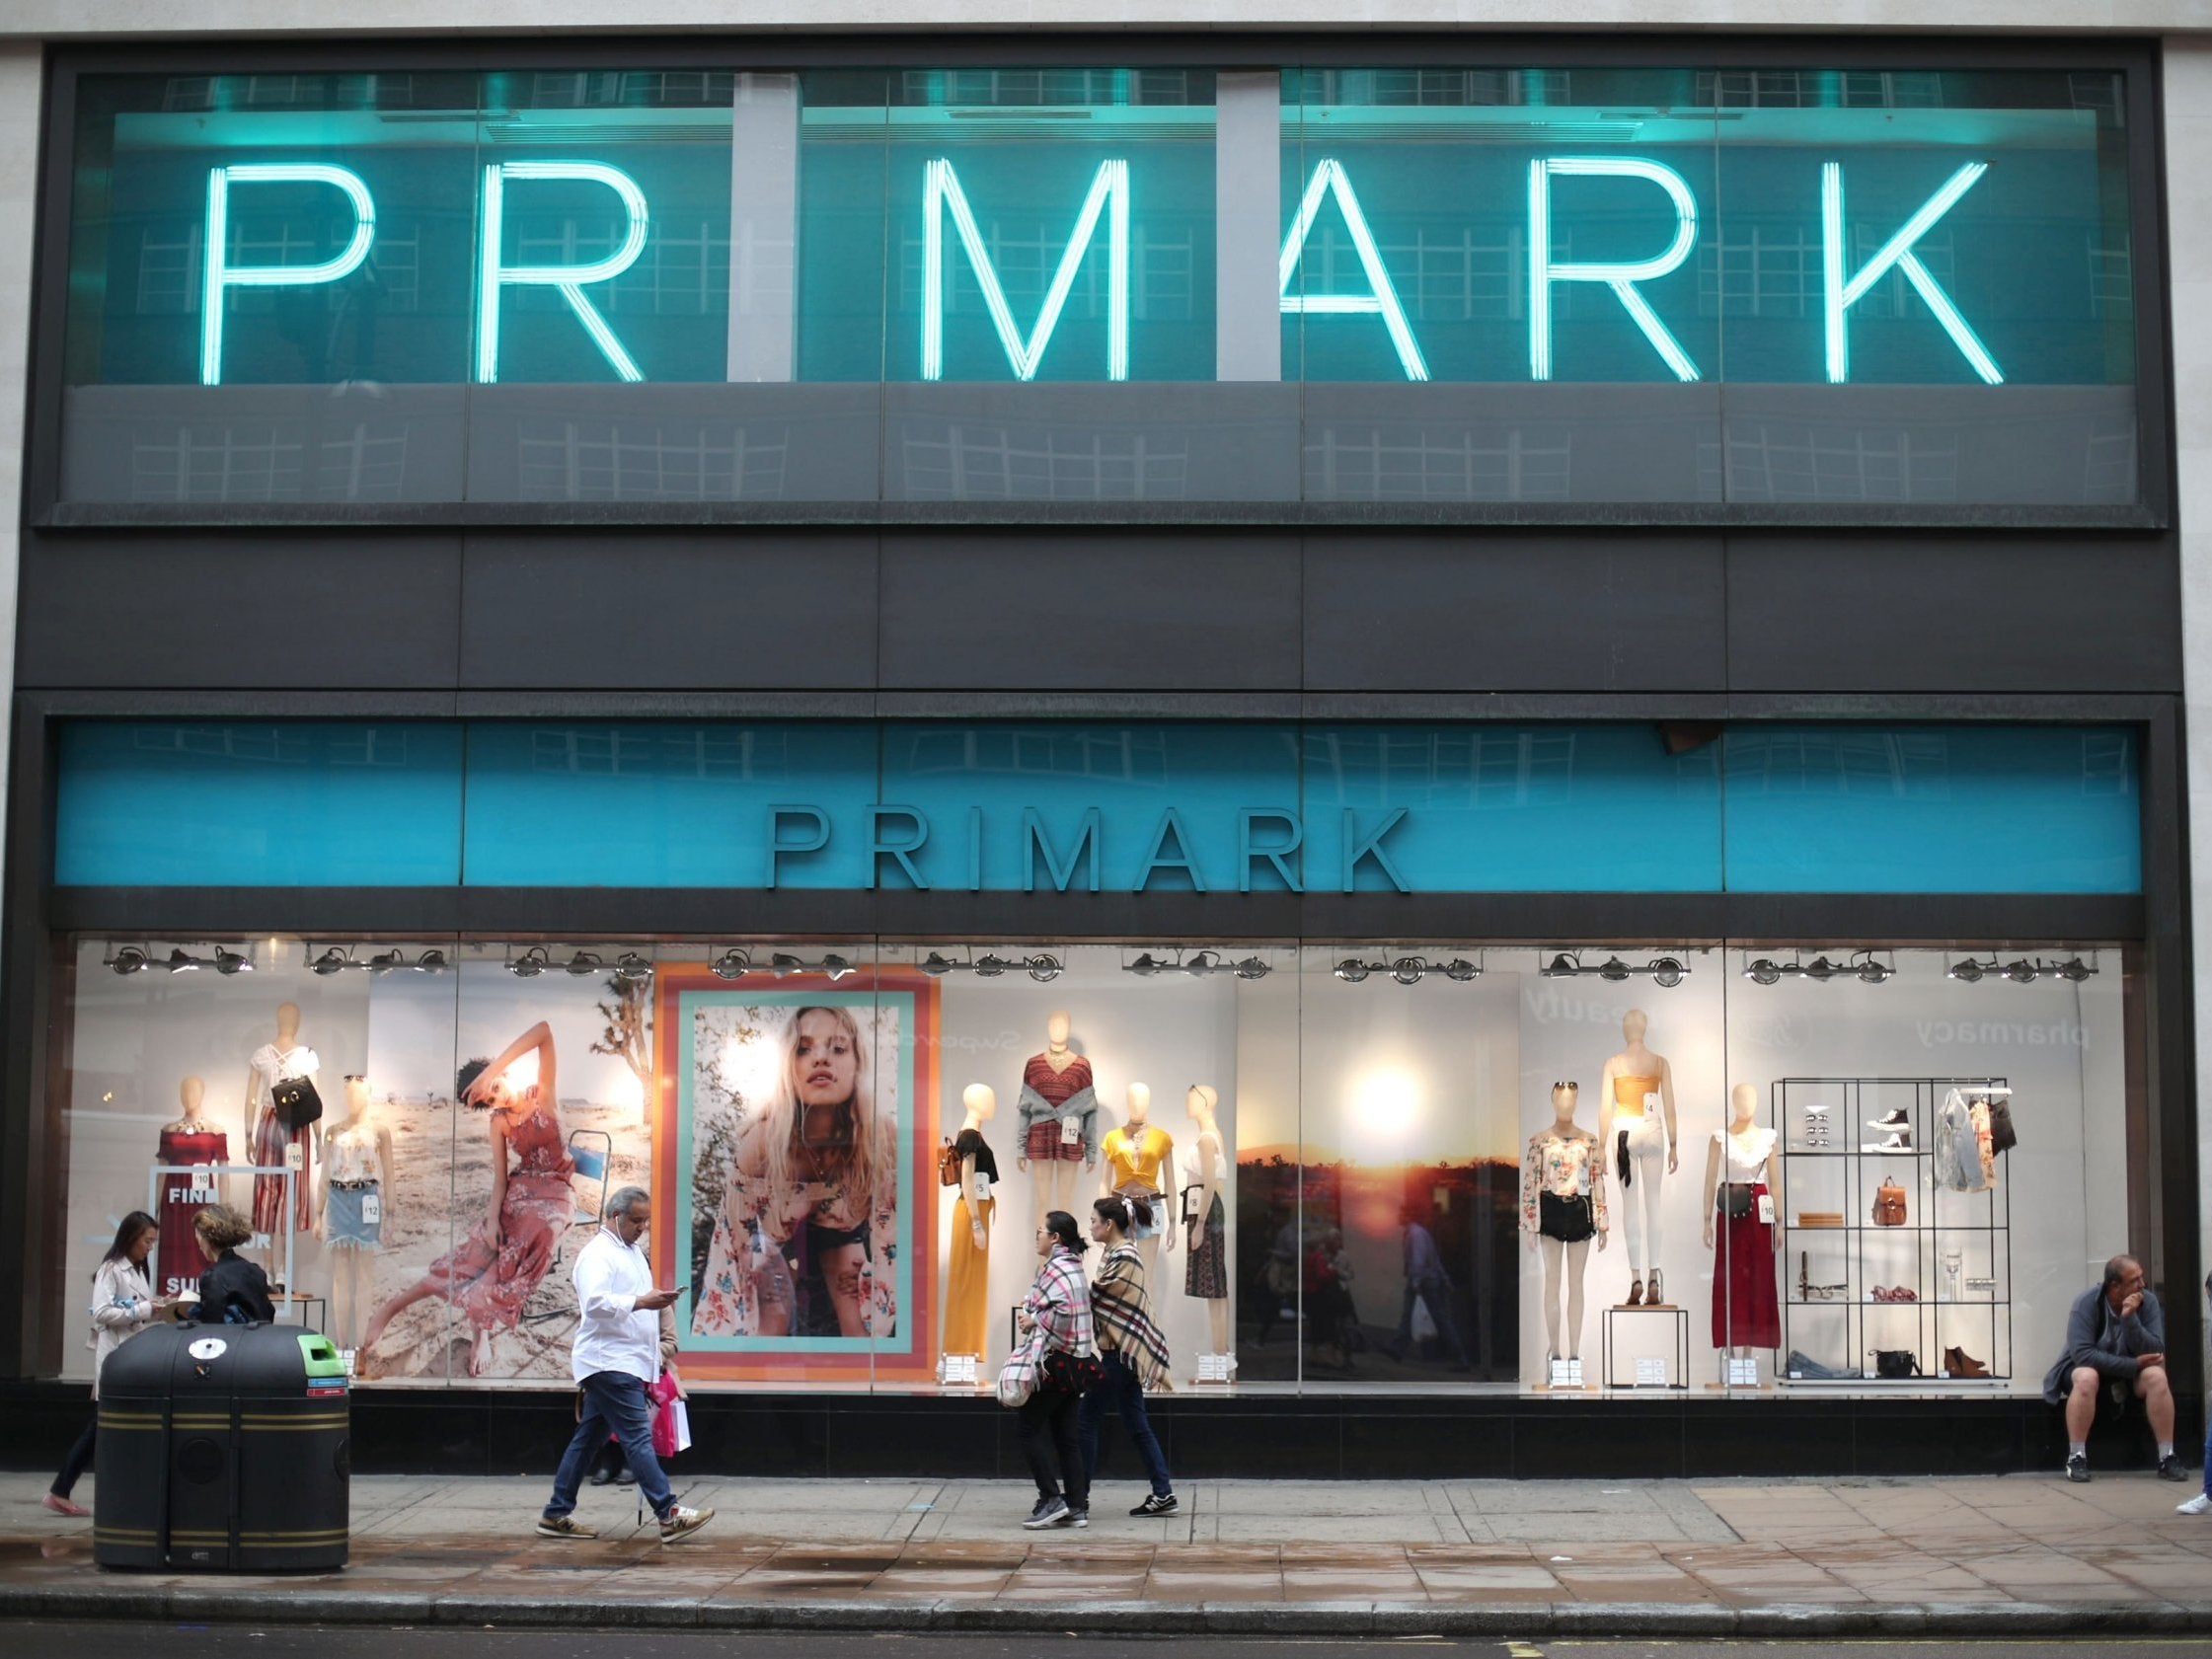 The lights are on at Primark amidst dark times for the high street